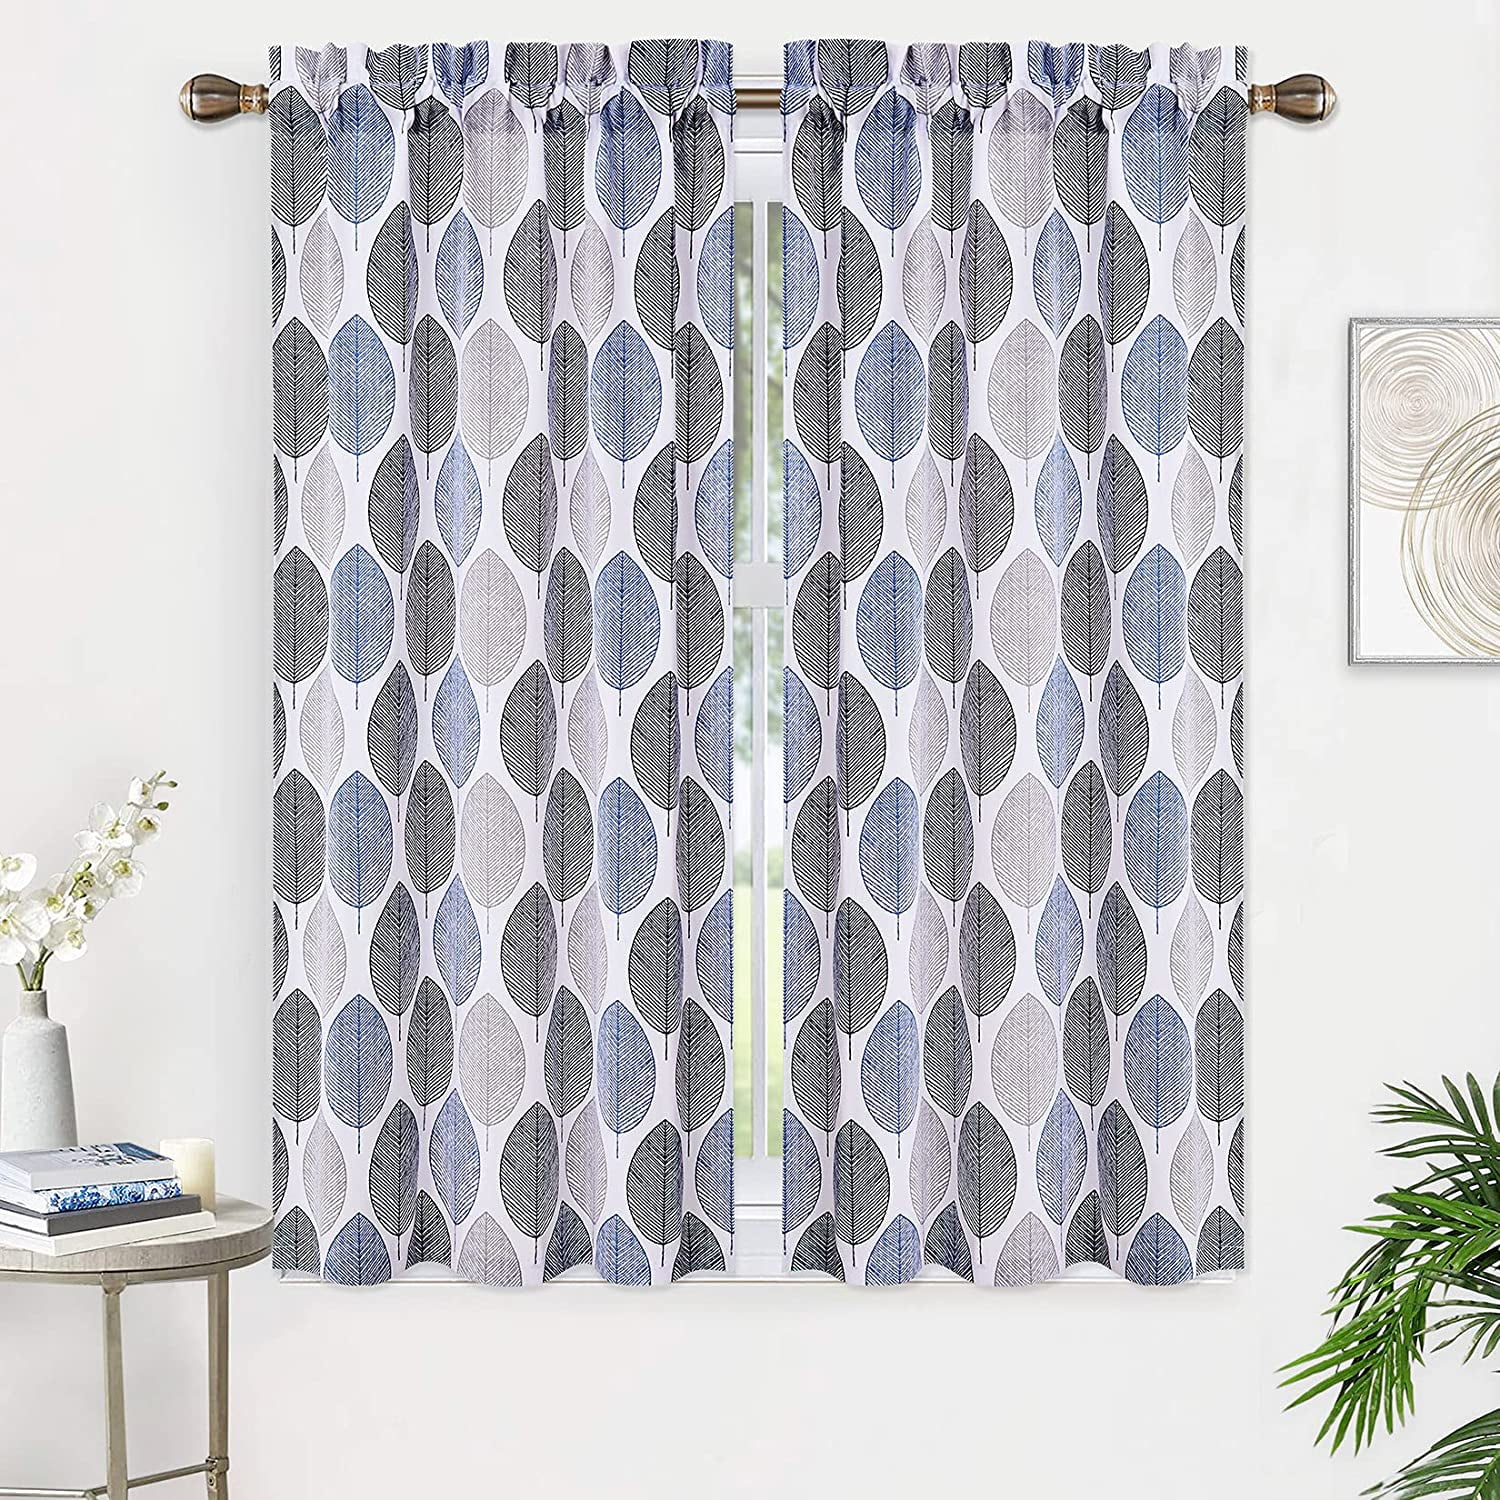 Kitchen Cafe Curtains 45 Inches Length Leaf Design Bathroom Window Curtain Farmhouse Flower Leaves Pattern Cotton Blend Half Covering Tier Curtains N Df828c6c 3764 4684 9ec5 157a4d5a006c.727b800b05f151c1968b033b70656dc8 